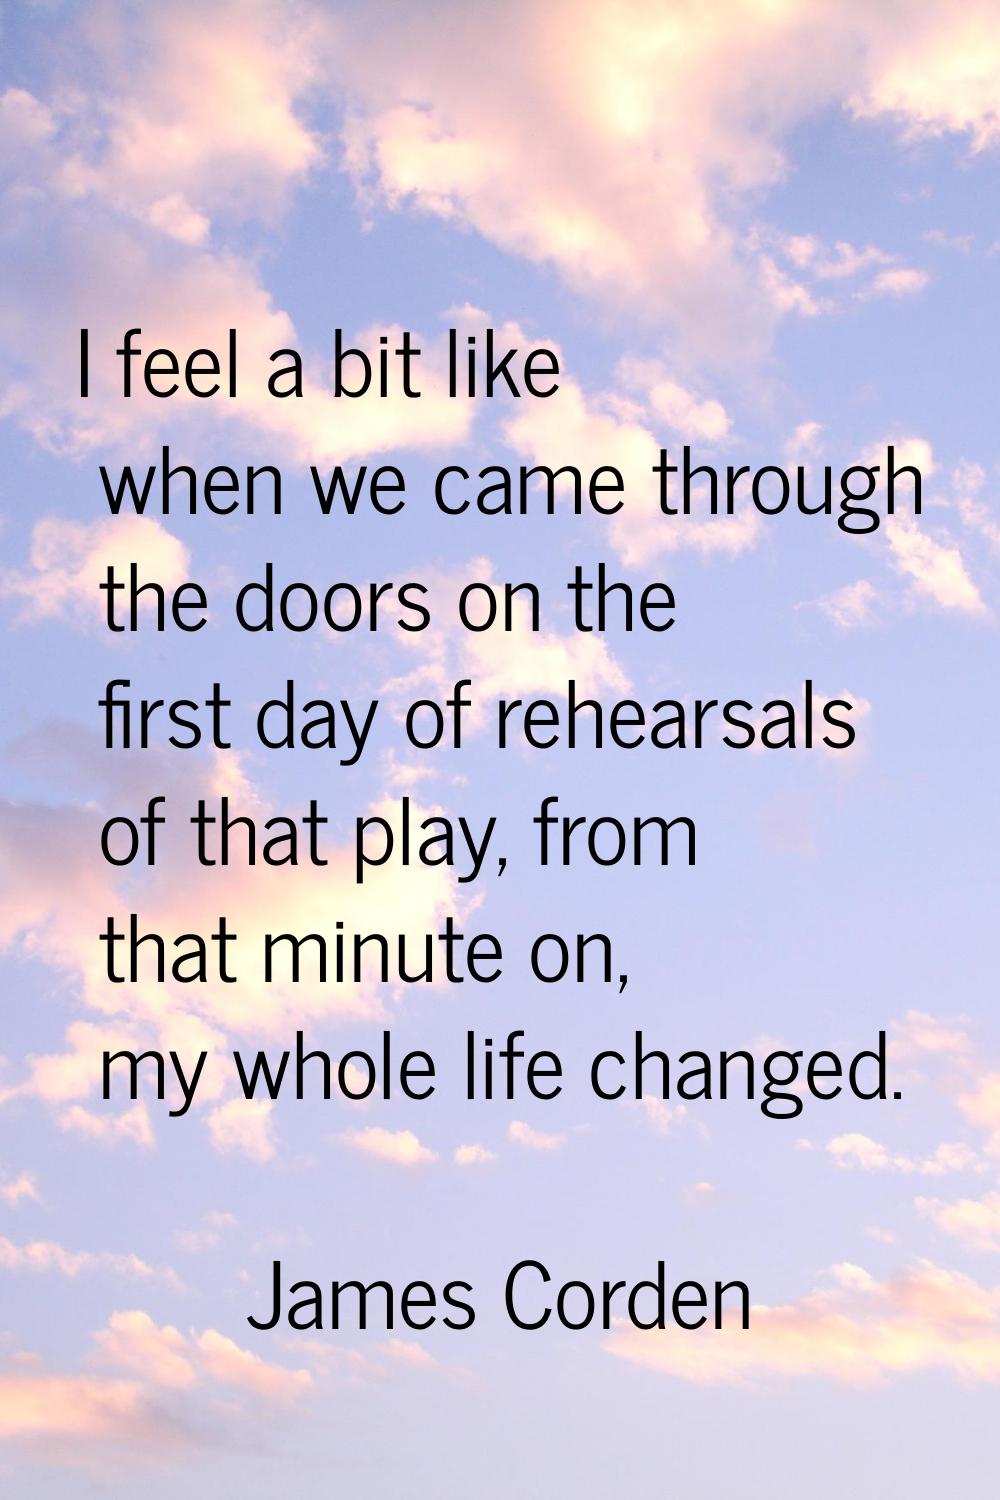 I feel a bit like when we came through the doors on the first day of rehearsals of that play, from 